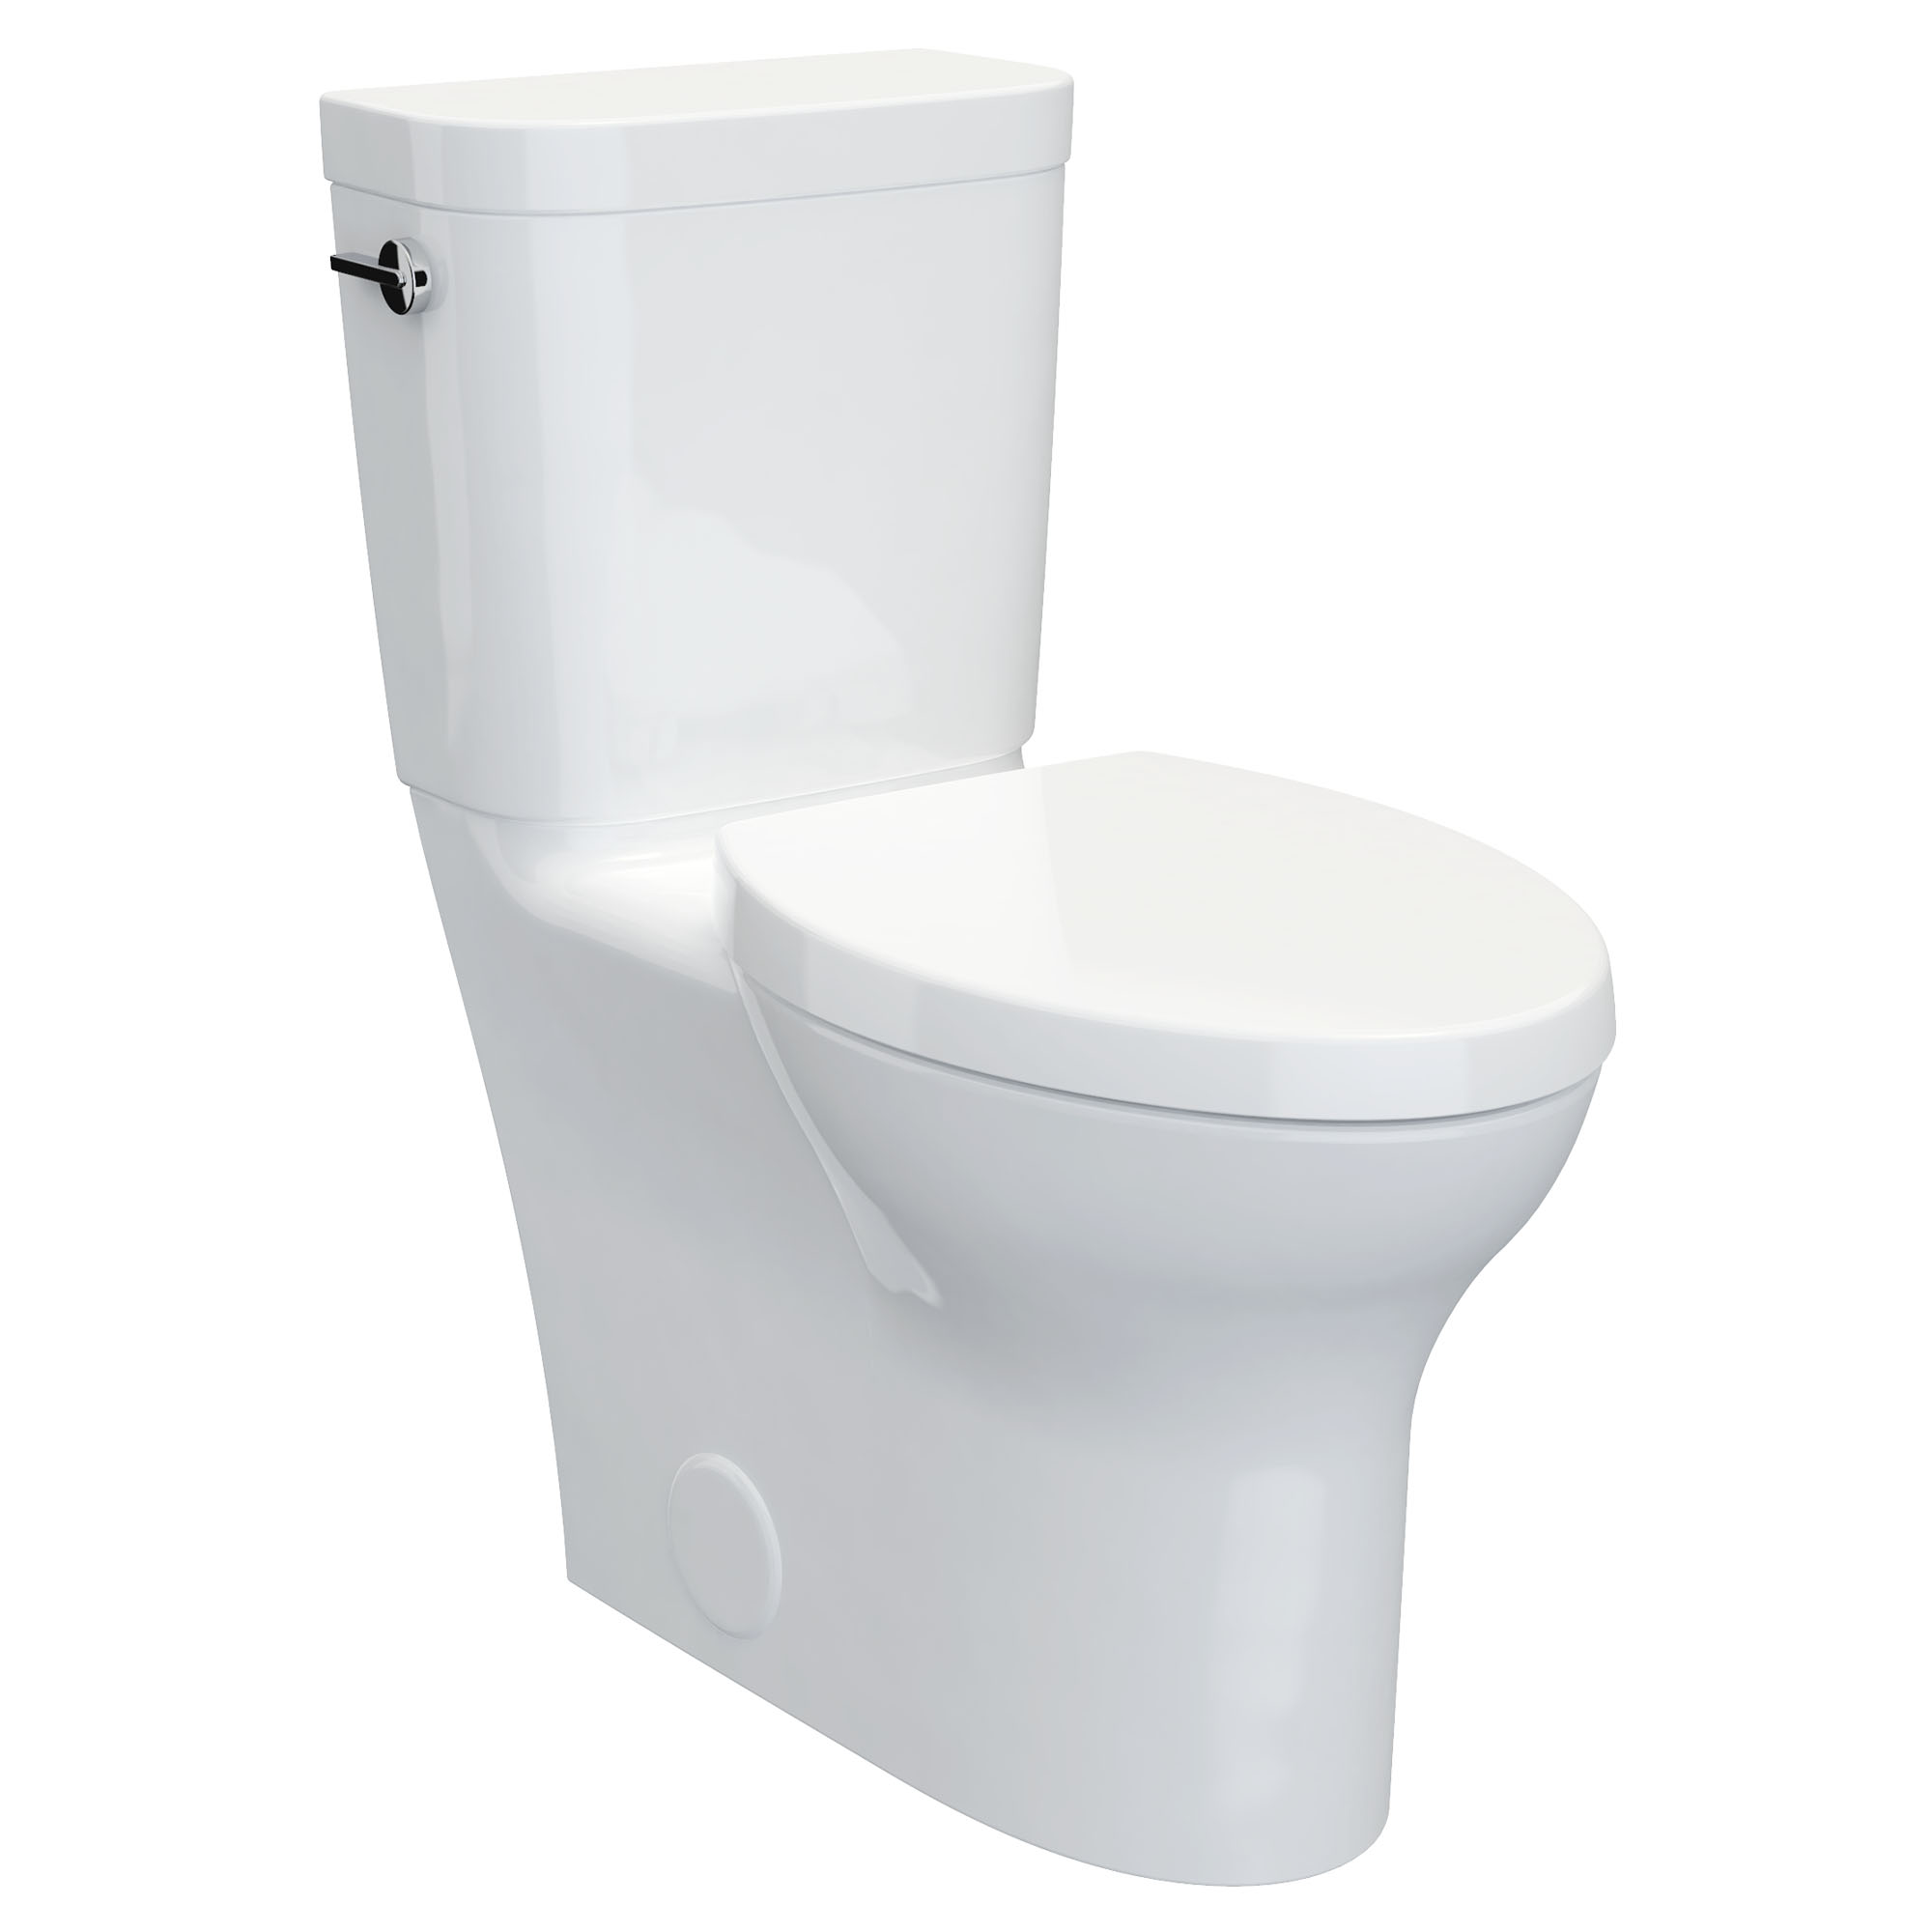 Equility Two-Piece Chair Height Elongated Toilet with Seat